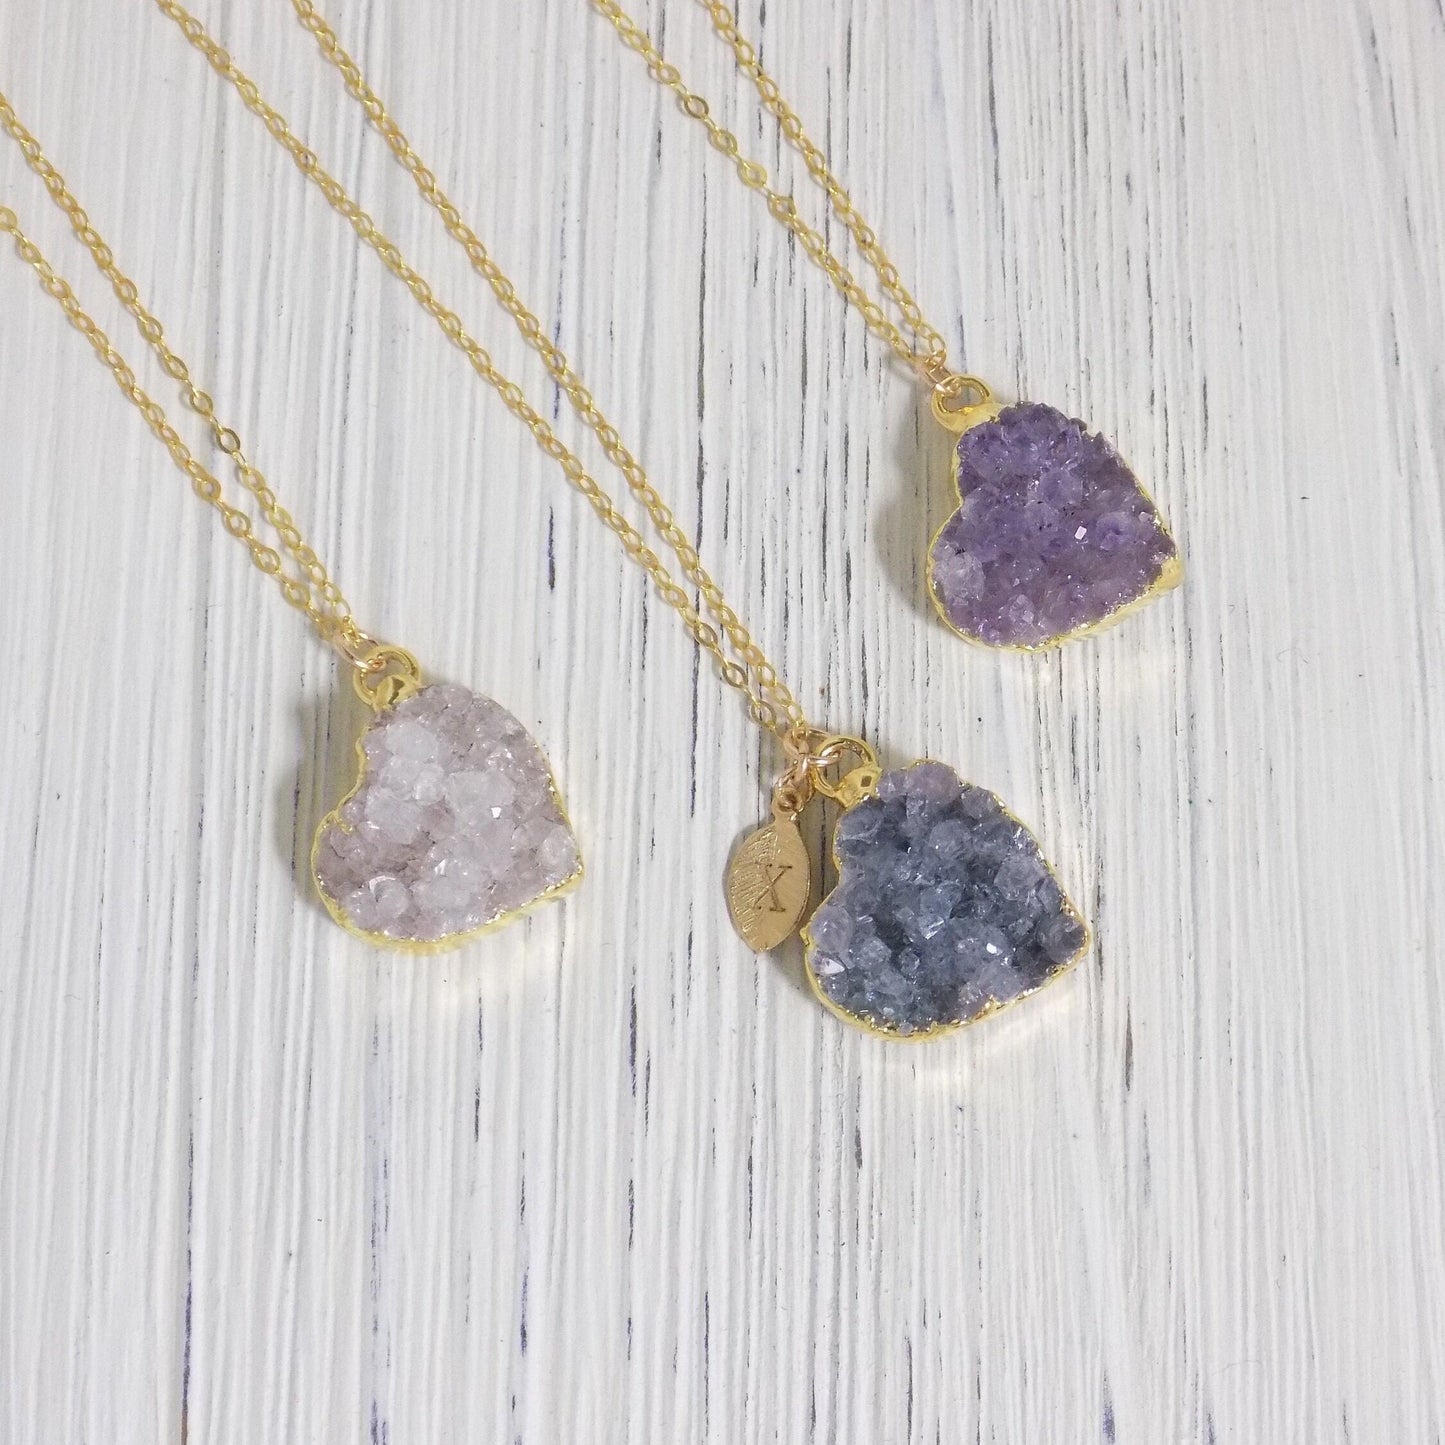 Mothers Day Gift, Heart Necklace, Personalized Druzy Necklaces, Raw Crystal Layering Necklace, Birthday Gift Women, R14-09